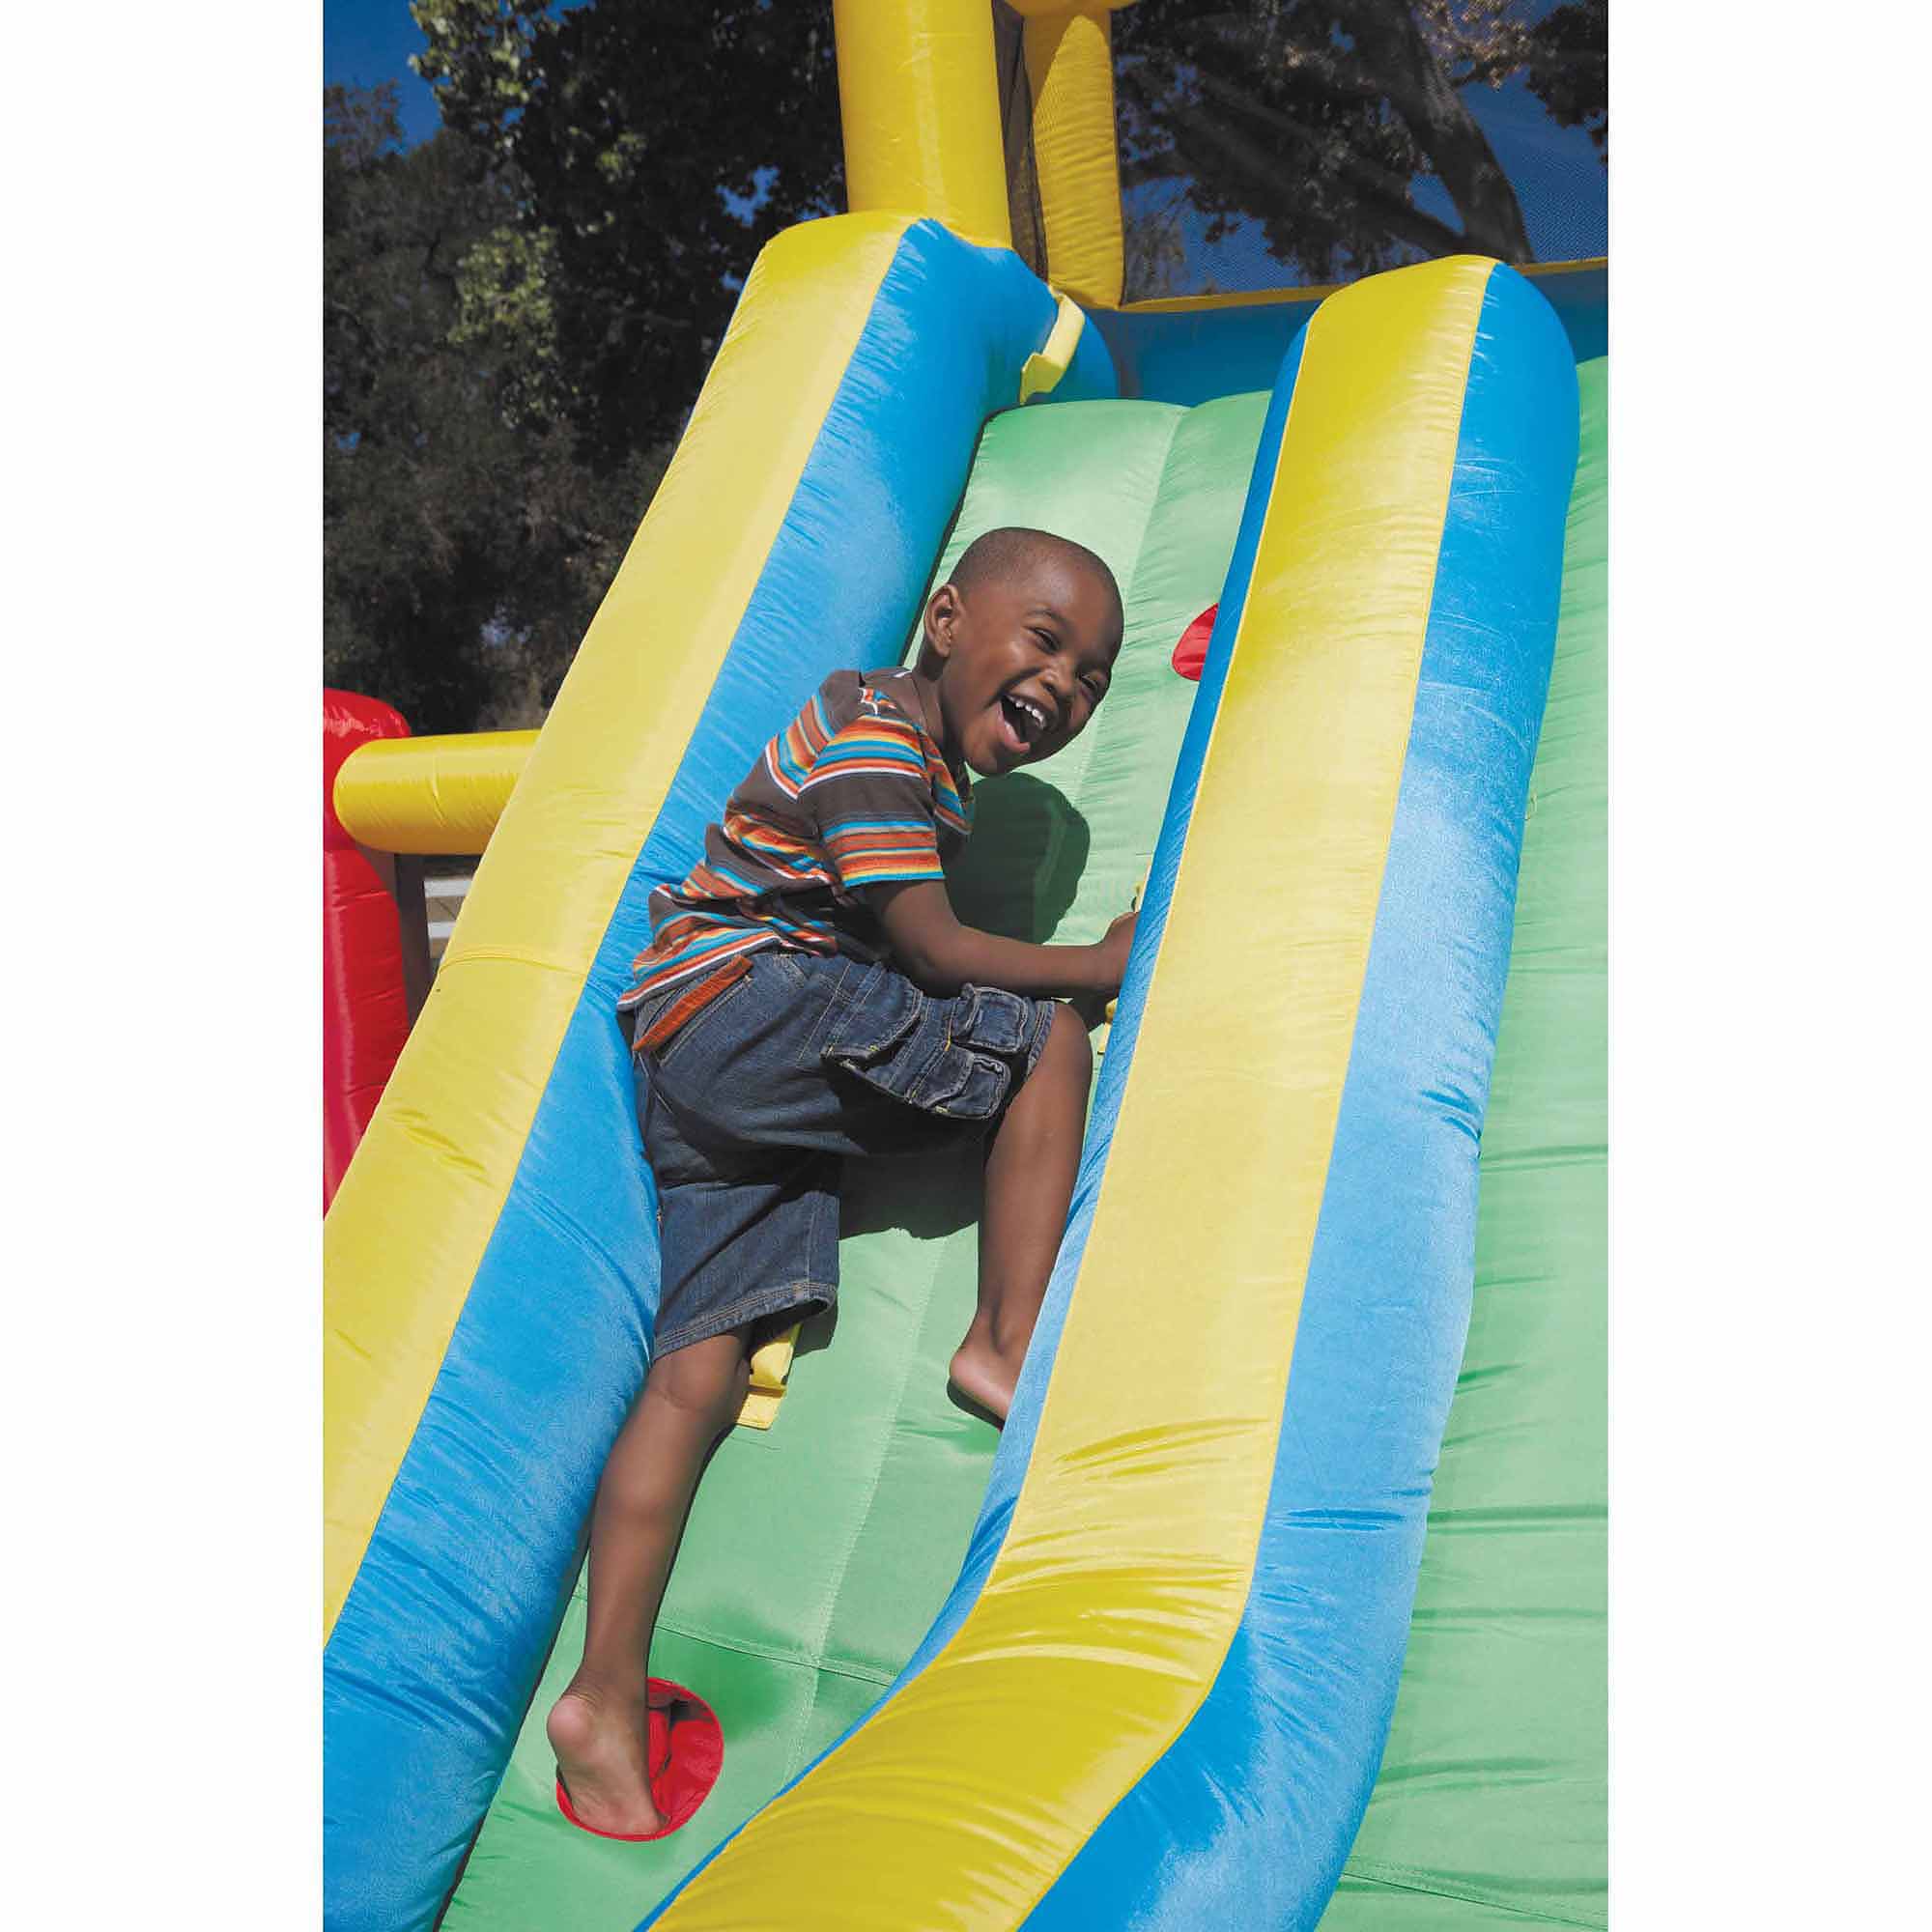 Little Tikes Giant Slide Bouncer Inflatable Bounce House with Blower and Climbing Wall, Fits up to 3 Kids, Multicolor, Outdoor Backyard Toy for Boys Girls Ages 3 4 5+ to 8 Year Old - image 5 of 6